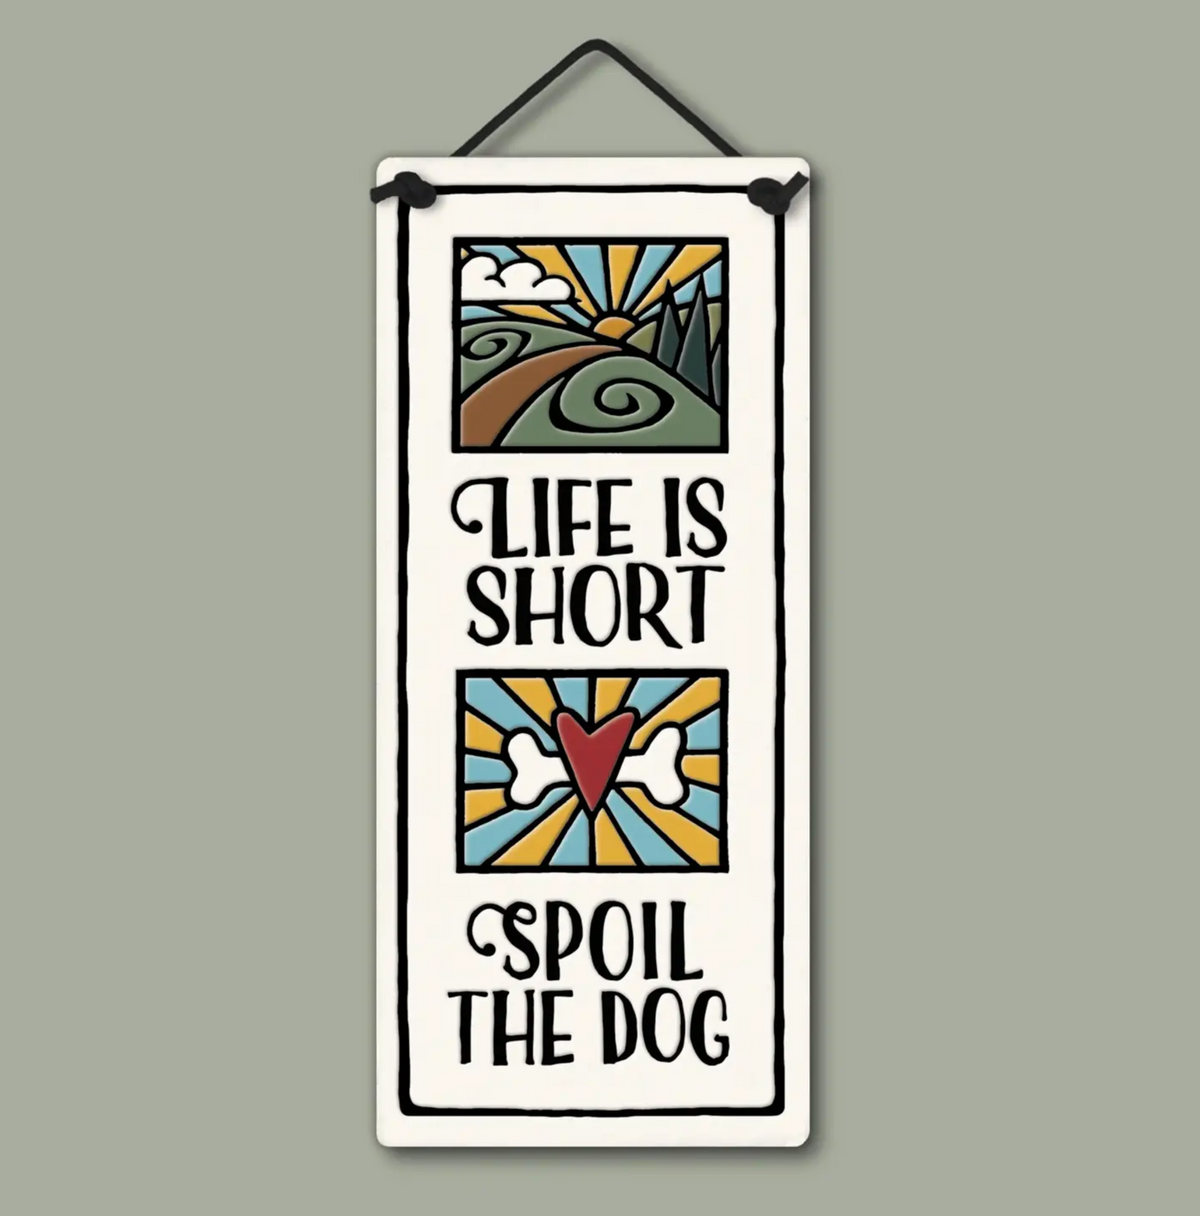 Spoil The Dog - Heart of the Home PA